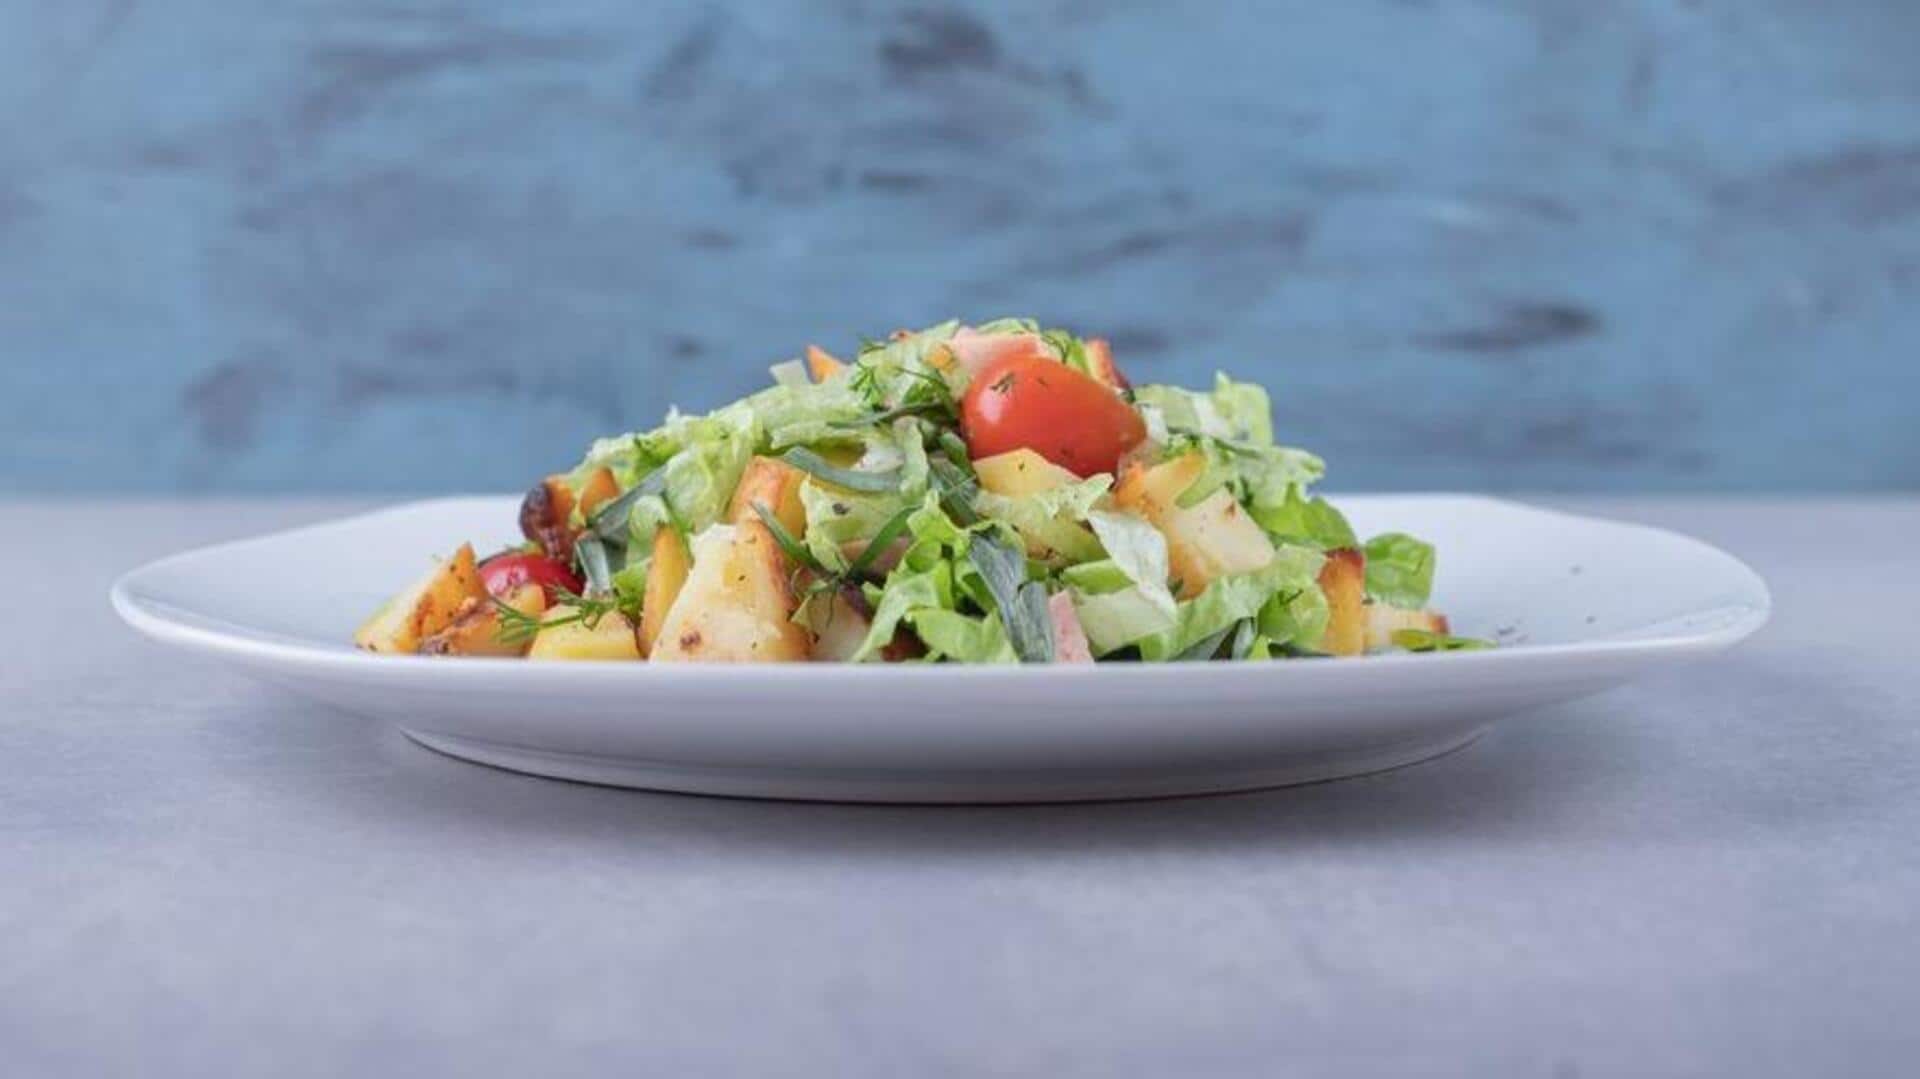 Egg-free Caesar salad: A step-by-step recipe for a flavorsome day 